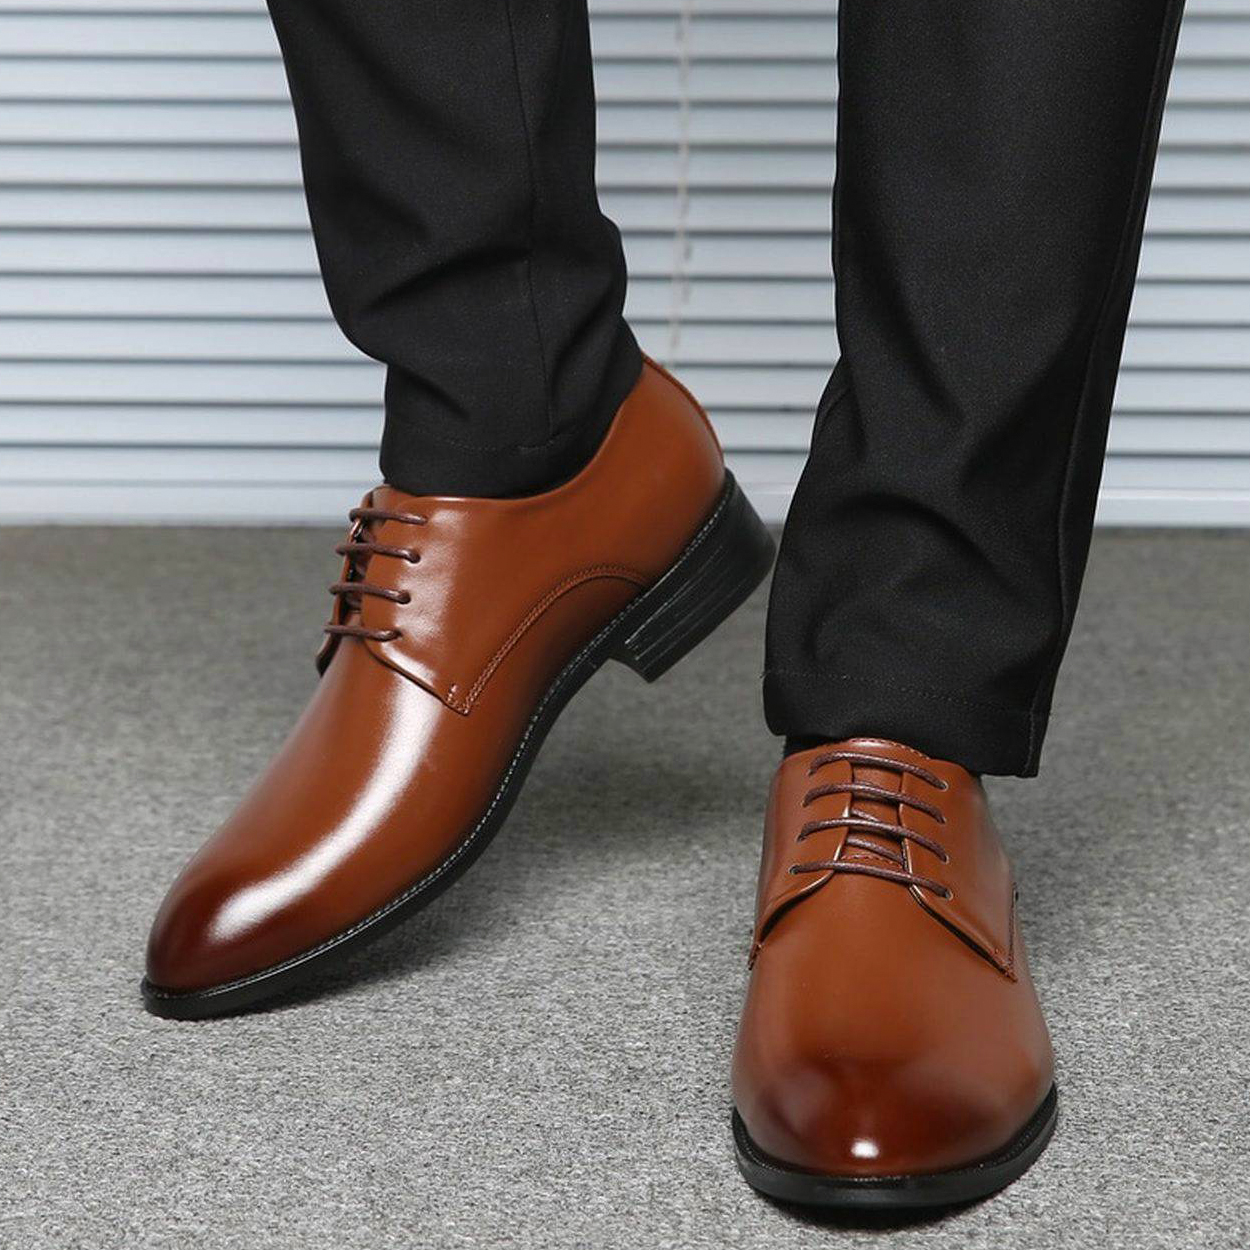 Brown Dress Shoes With Black Pants